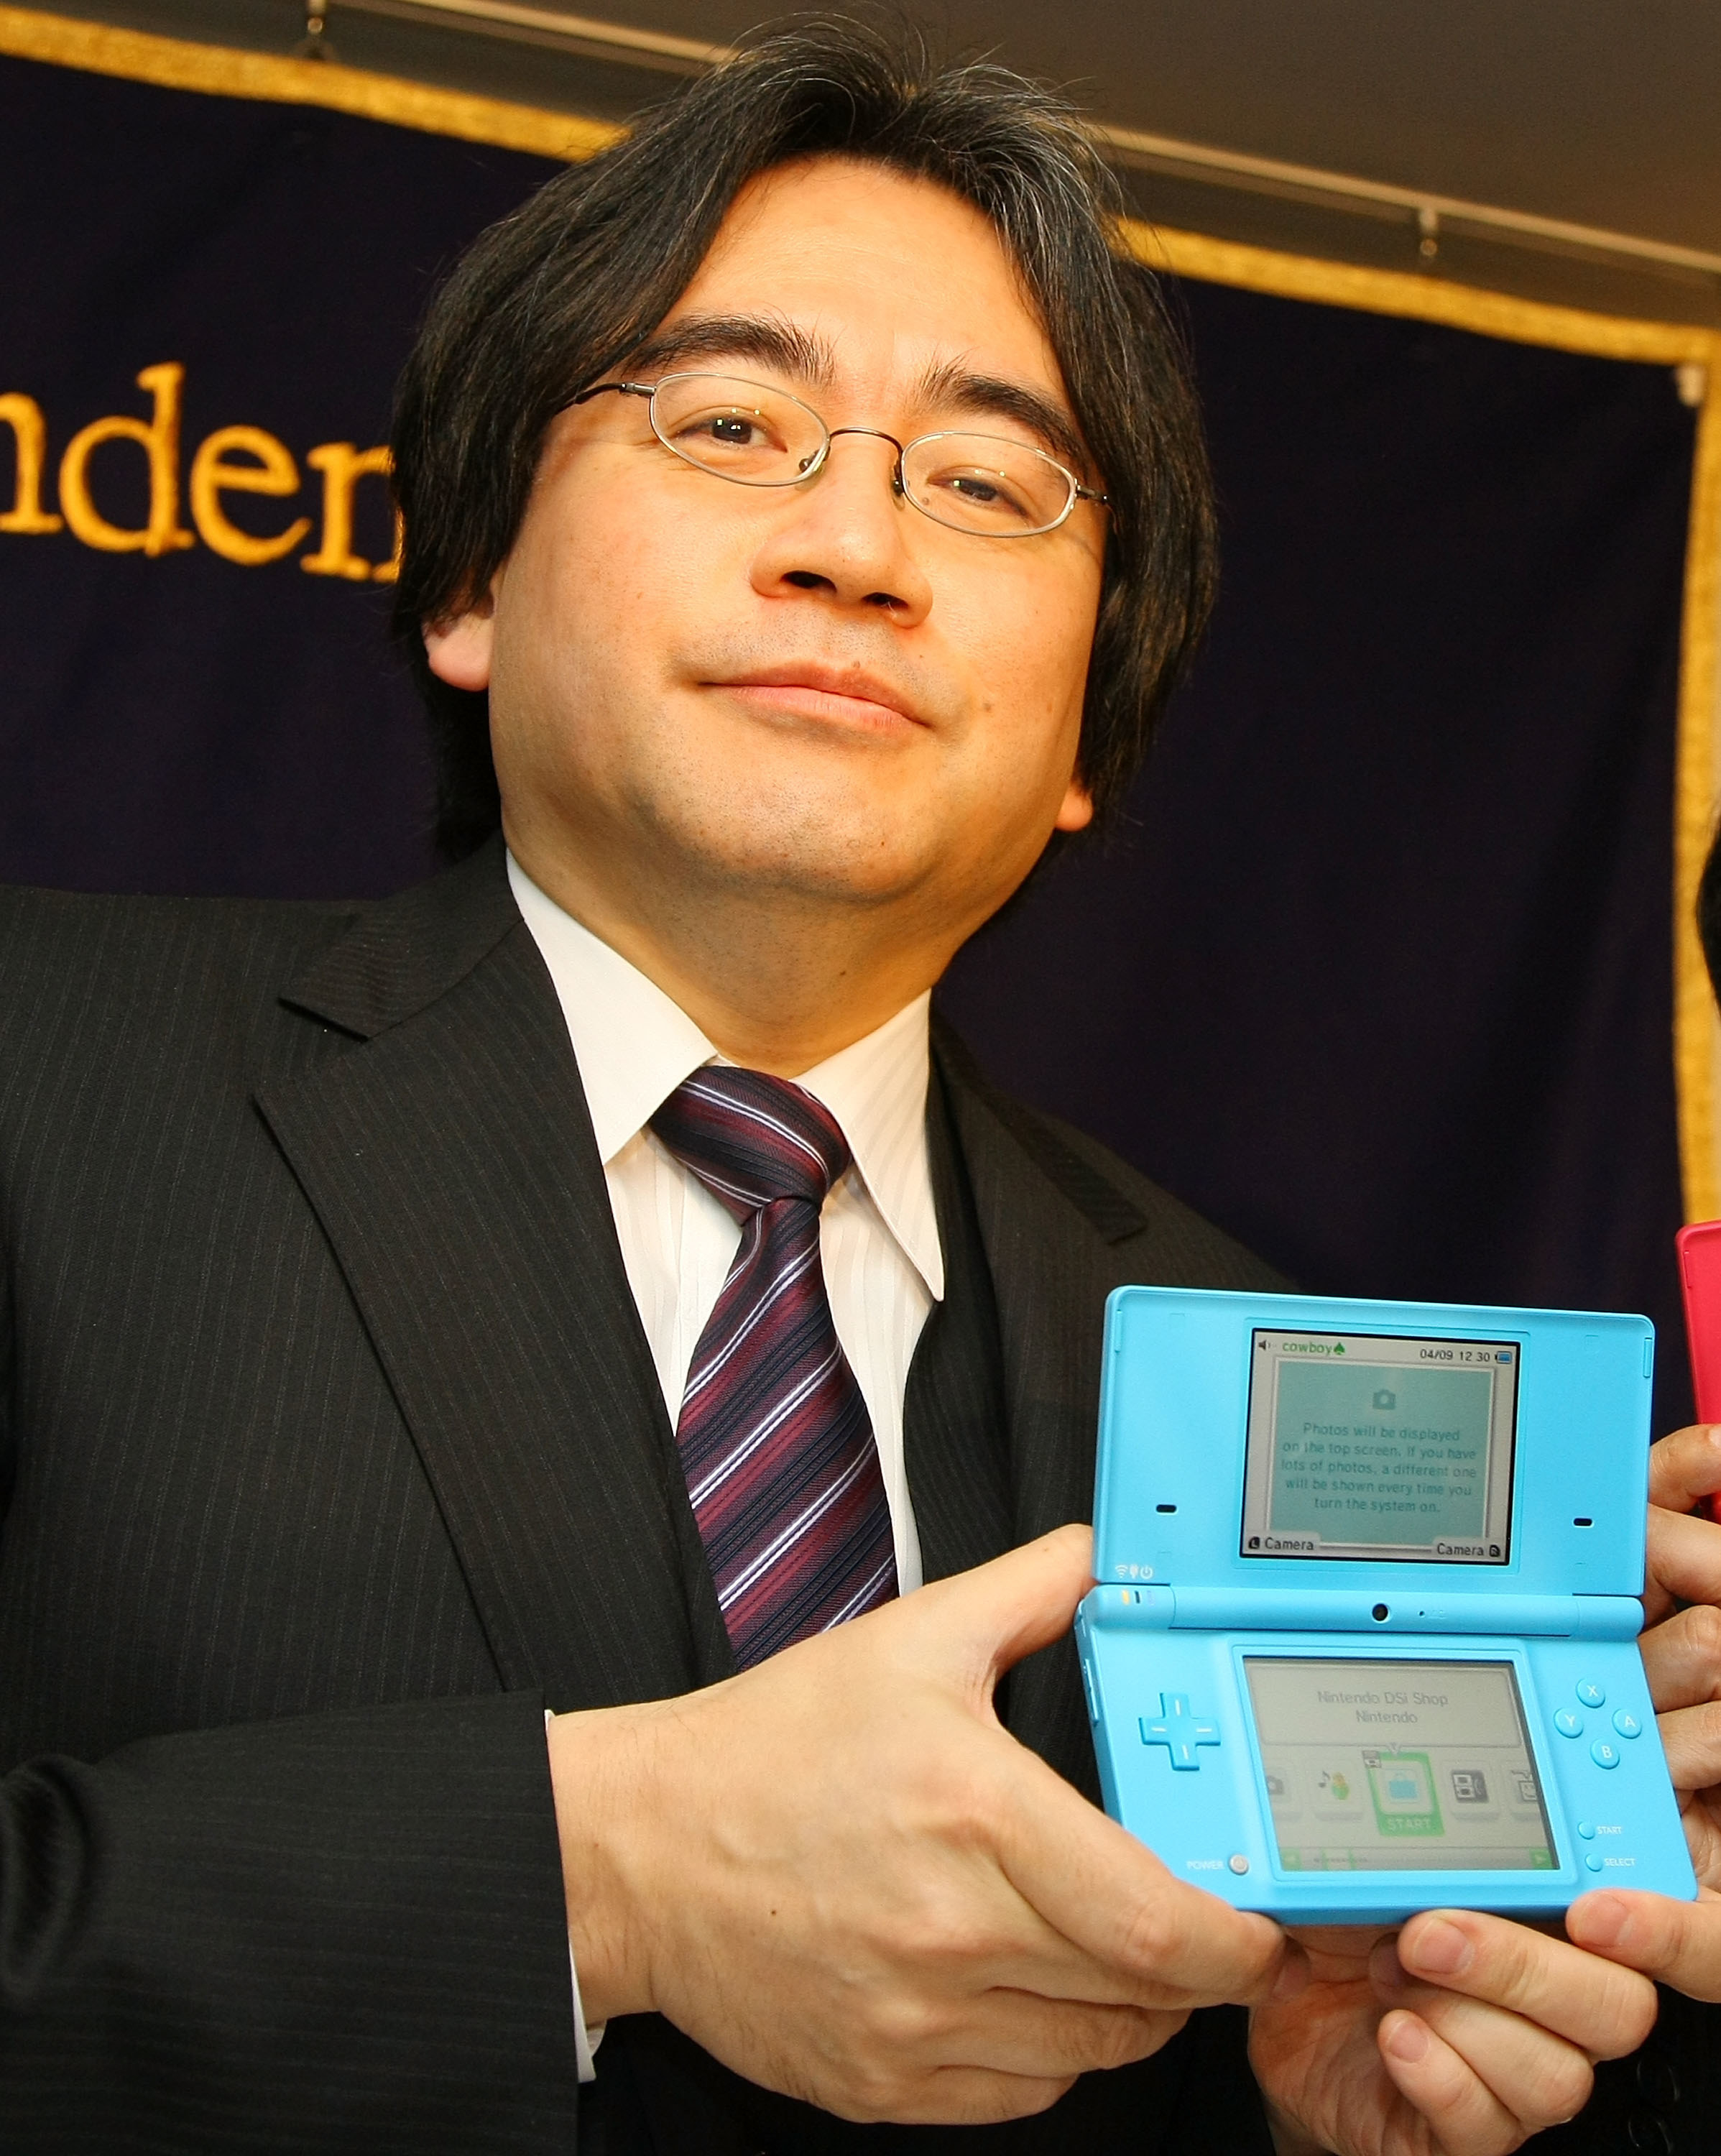 Dressed in a suit, Satoru Iwata proudly holds up a Nintendo DS.